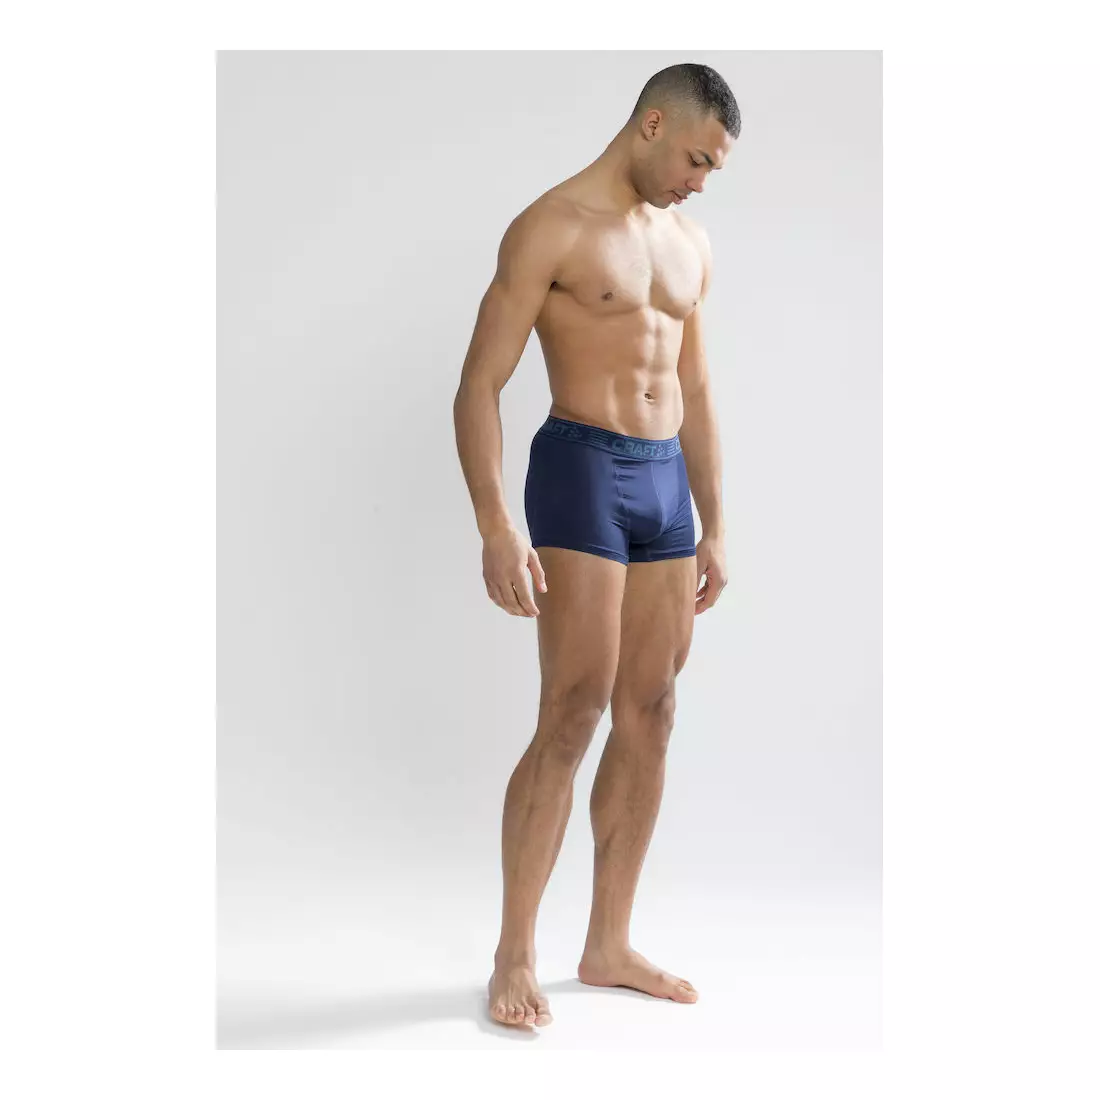 CRAFT men's sports boxer shorts 3-INCH 1905488-2677